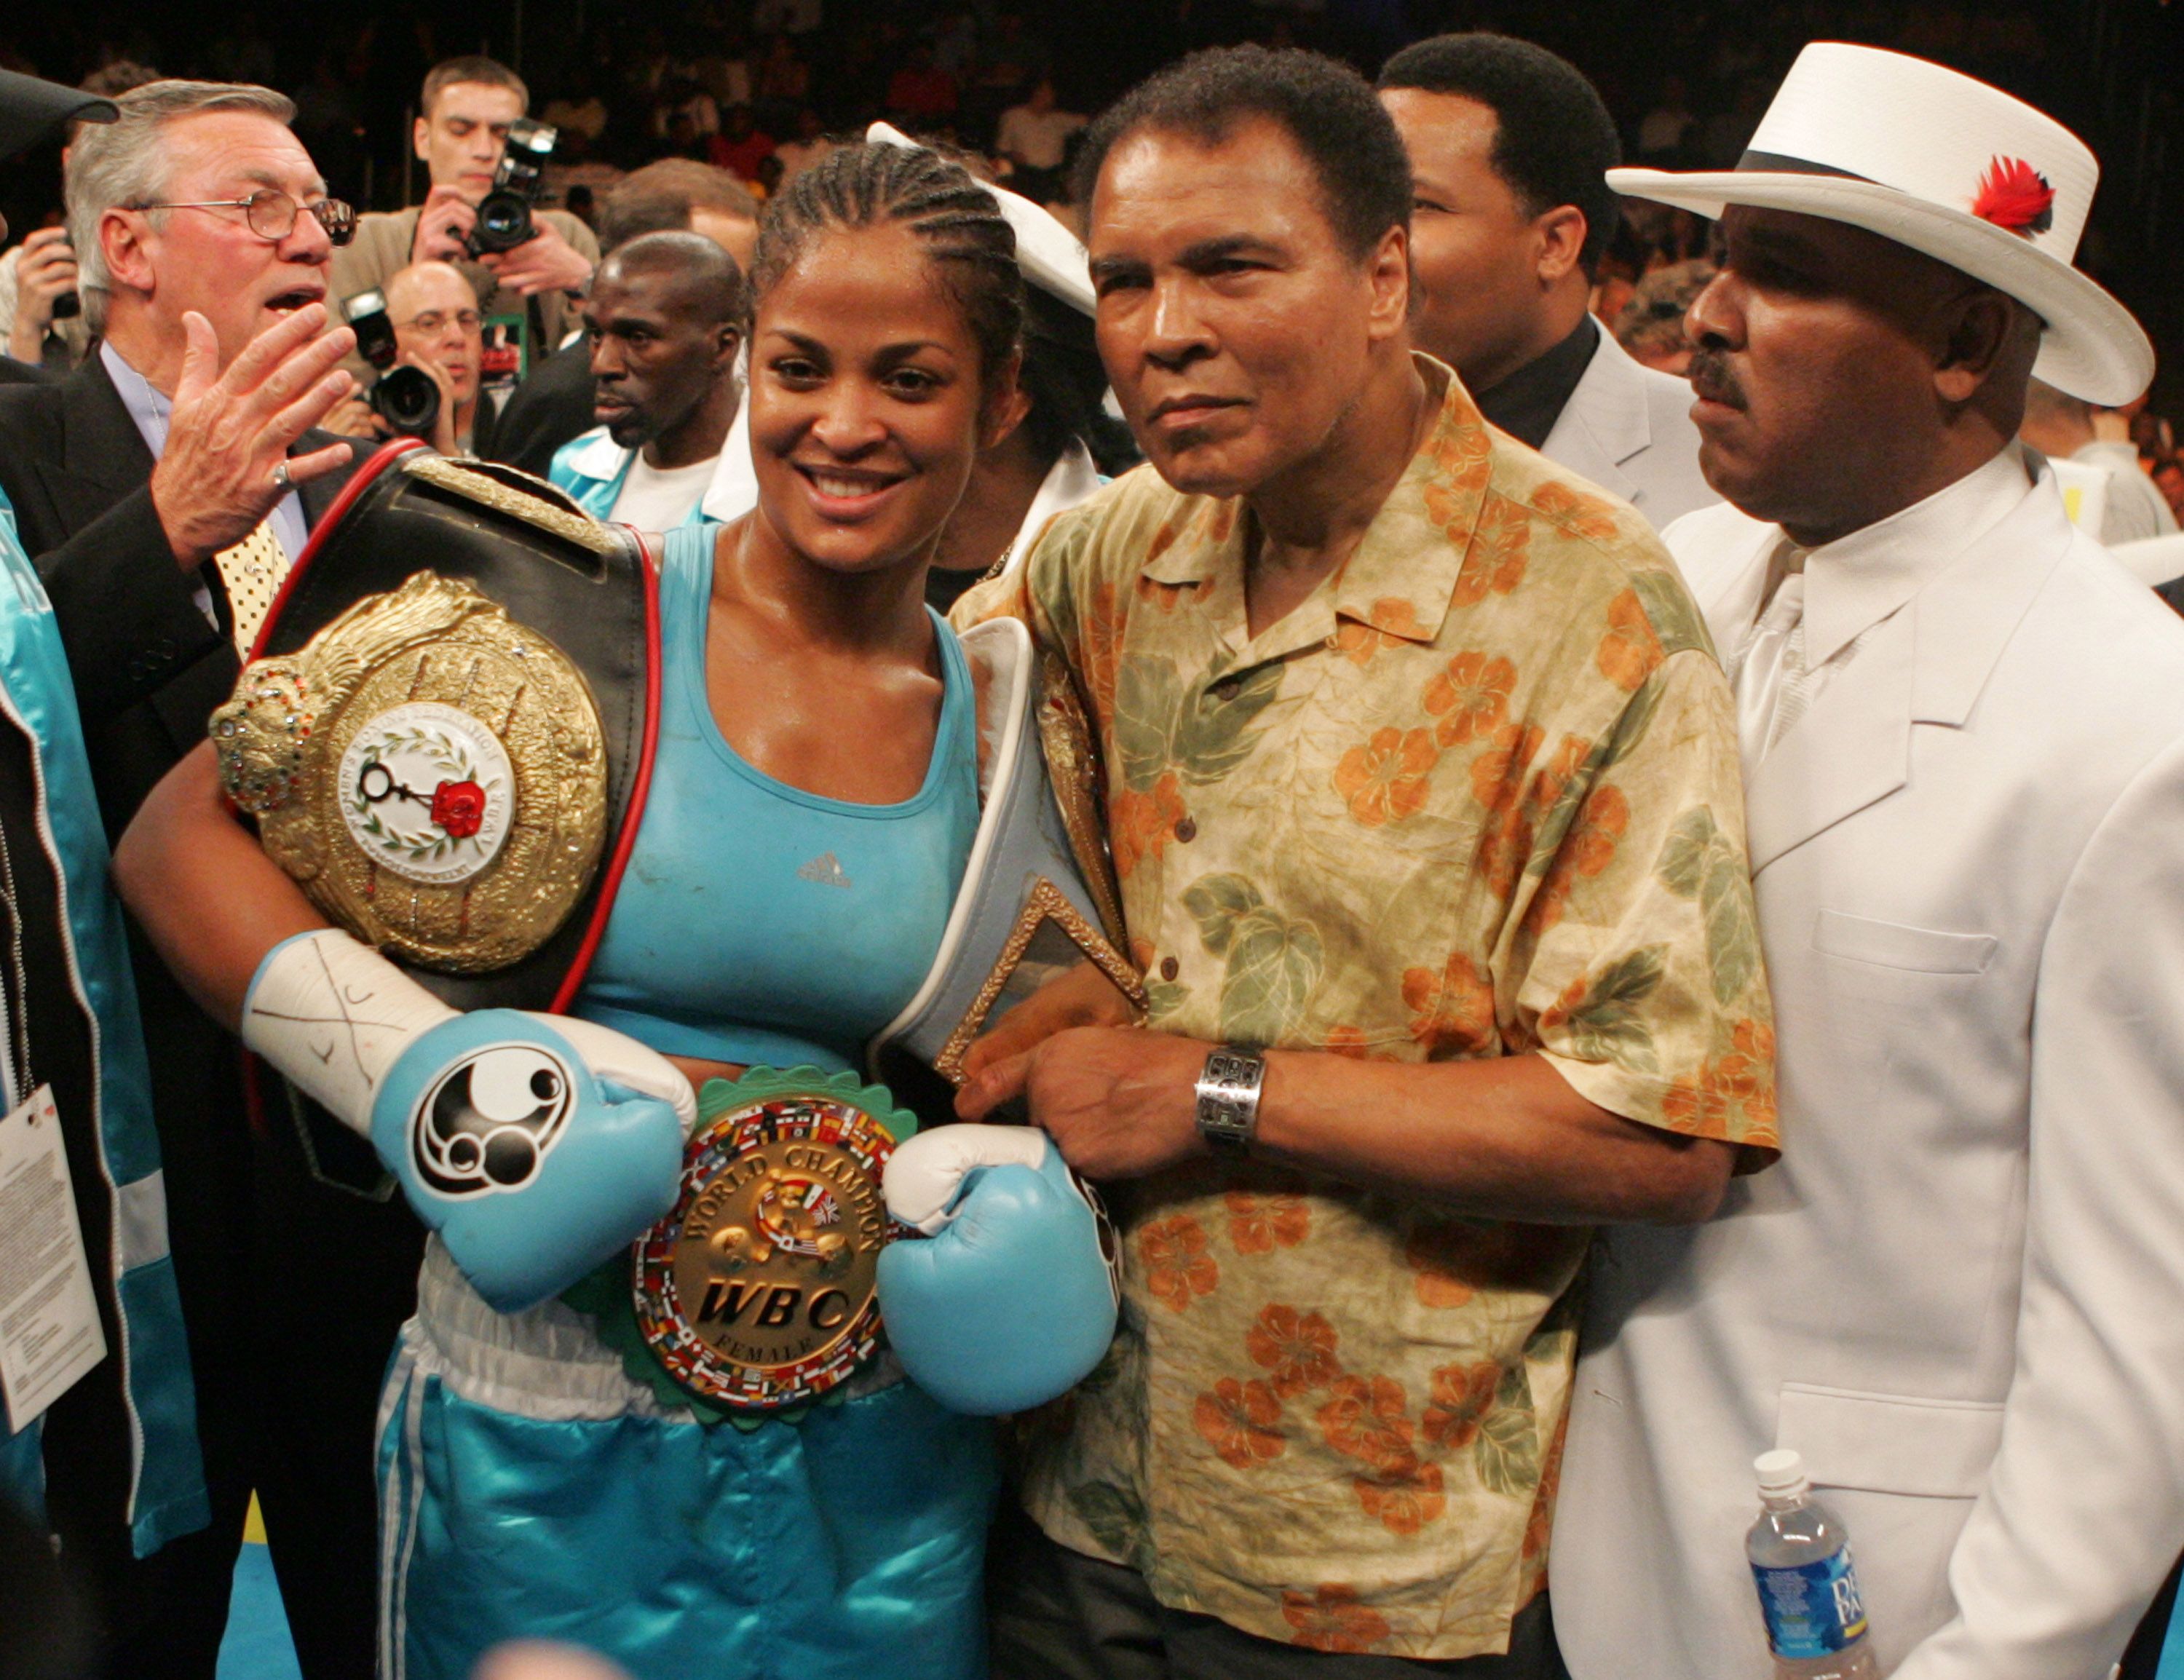 Laila Ali with her father Muhammad Ali after a boxing match | Source: Getty Images/GlobalImagesUkraine